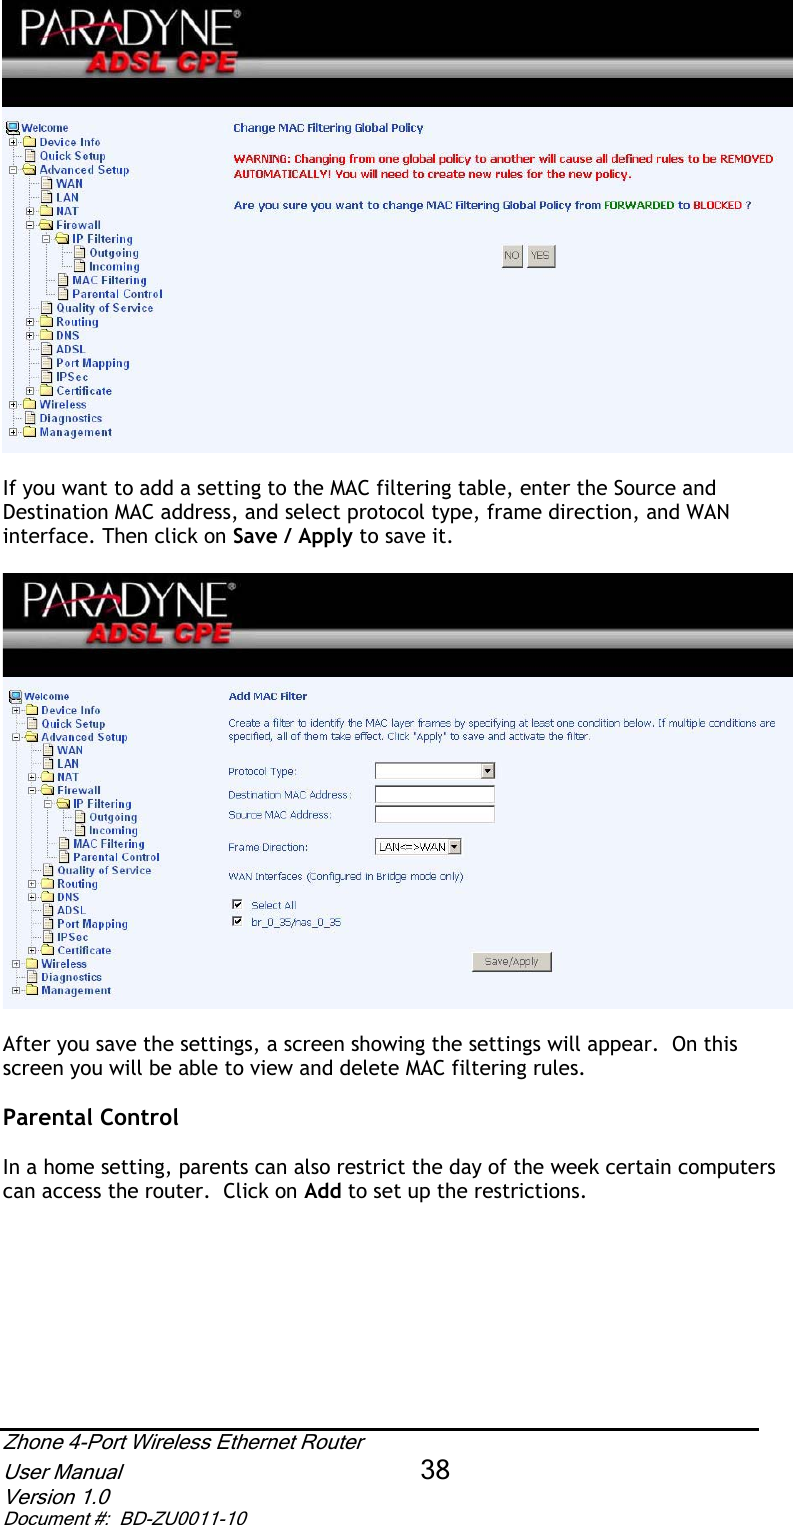 If you want to add a setting to the MAC filtering table, enter the Source and Destination MAC address, and select protocol type, frame direction, and WAN interface. Then click on Save / Apply to save it.After you save the settings, a screen showing the settings will appear.  On this screen you will be able to view and delete MAC filtering rules.  Parental Control In a home setting, parents can also restrict the day of the week certain computers can access the router.  Click on Add to set up the restrictions. Zhone 4-Port Wireless Ethernet Router User Manual 38Version 1.0 Document #:  BD-ZU0011-10